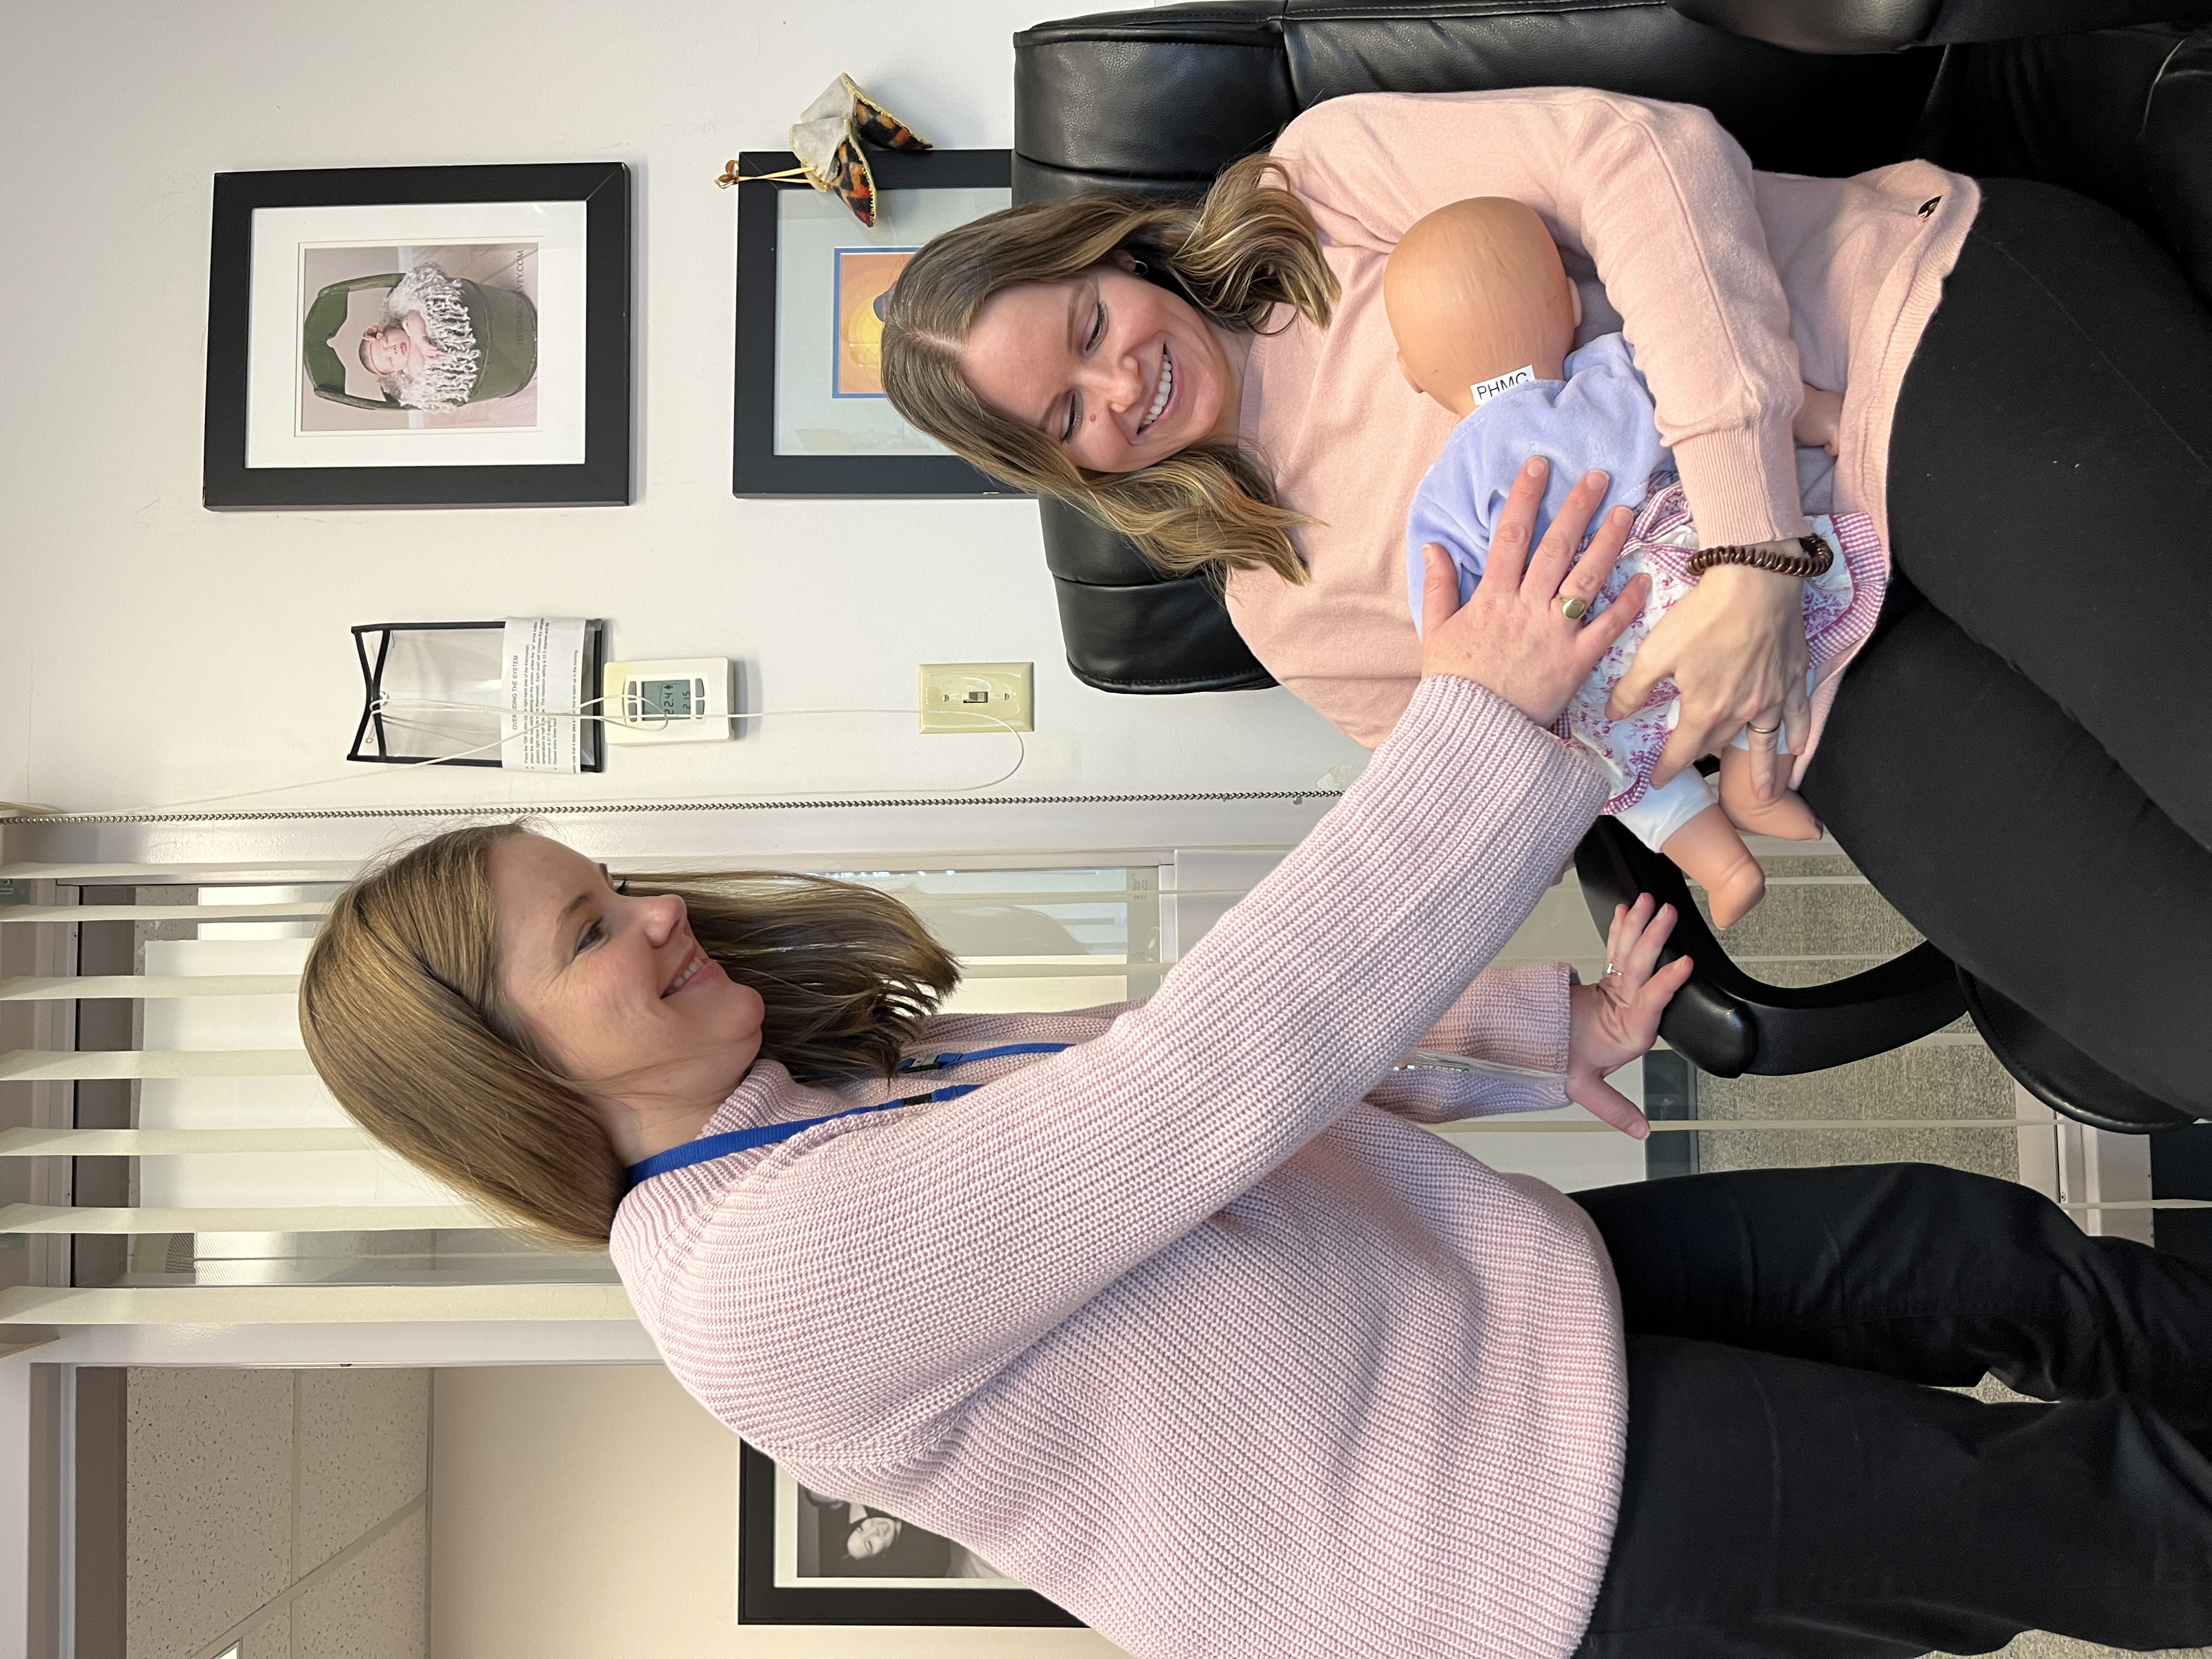 A person in a pink sweater with brown hair stands next to a person in a peach shirt sitting in a chair with a doll to demonstrate how to hold a baby during breastfeeding